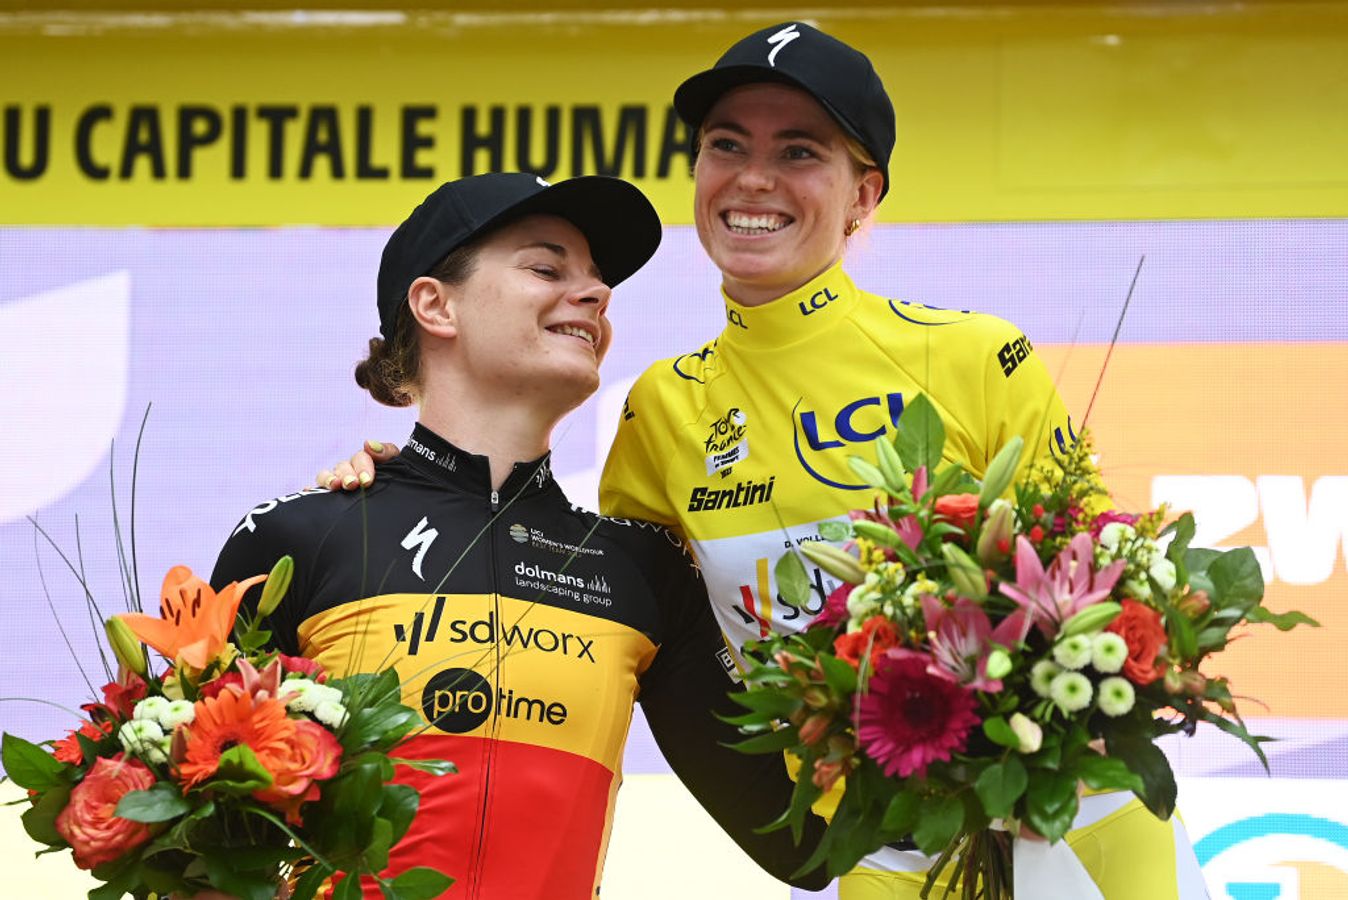 Kopecky and Vollering on the podium of the 2023 Tour de France